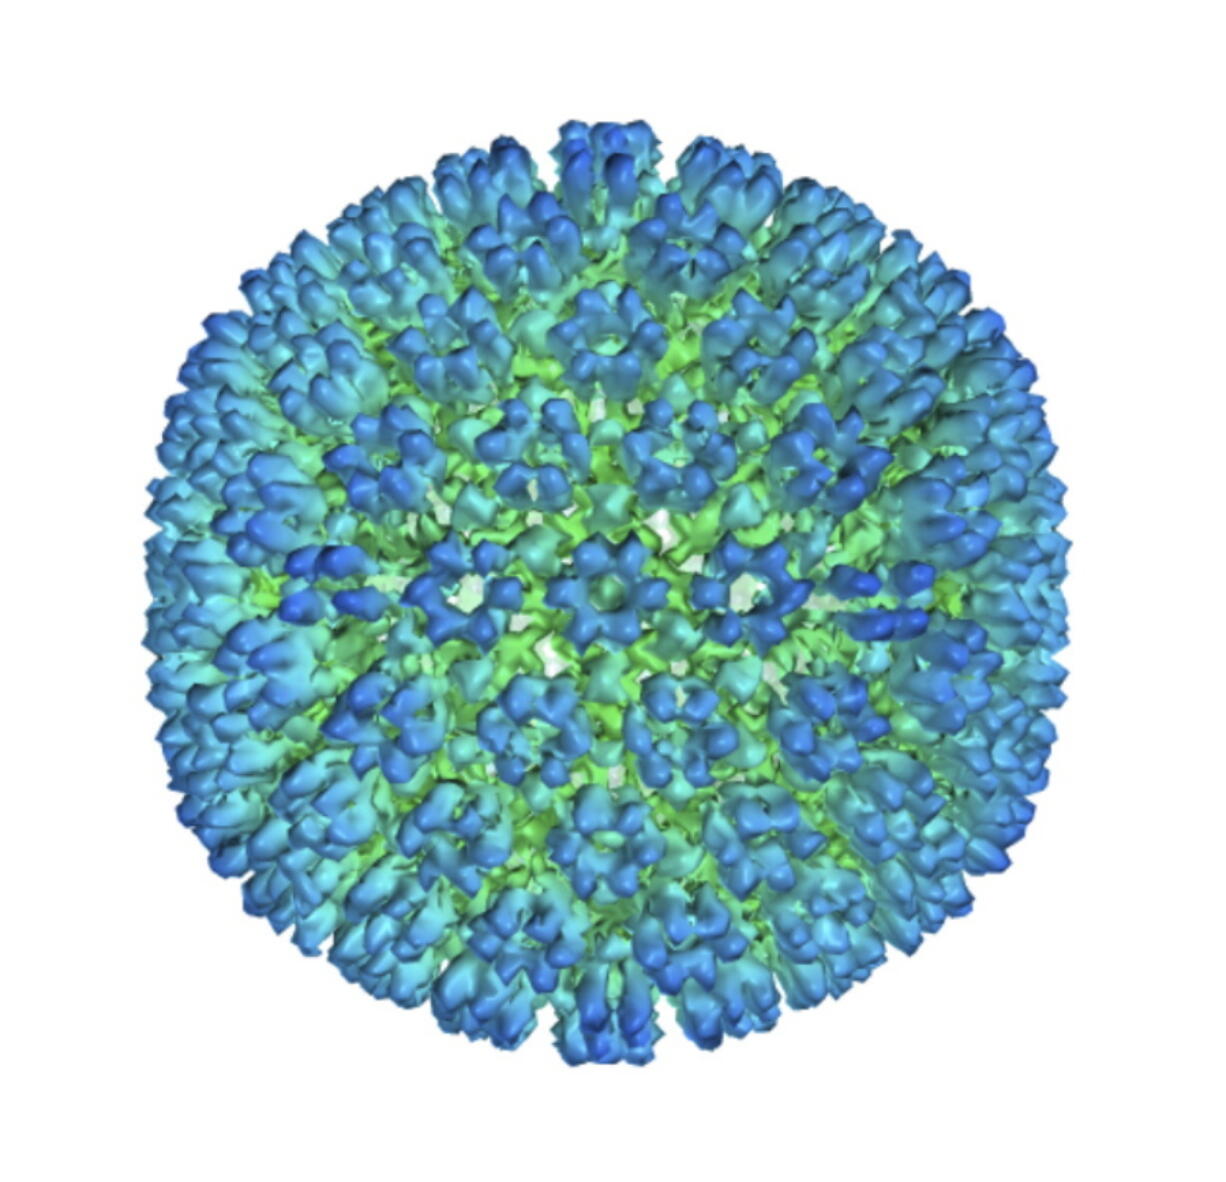 An illustration of the outer coating of the Epstein-Barr virus. (U.S.